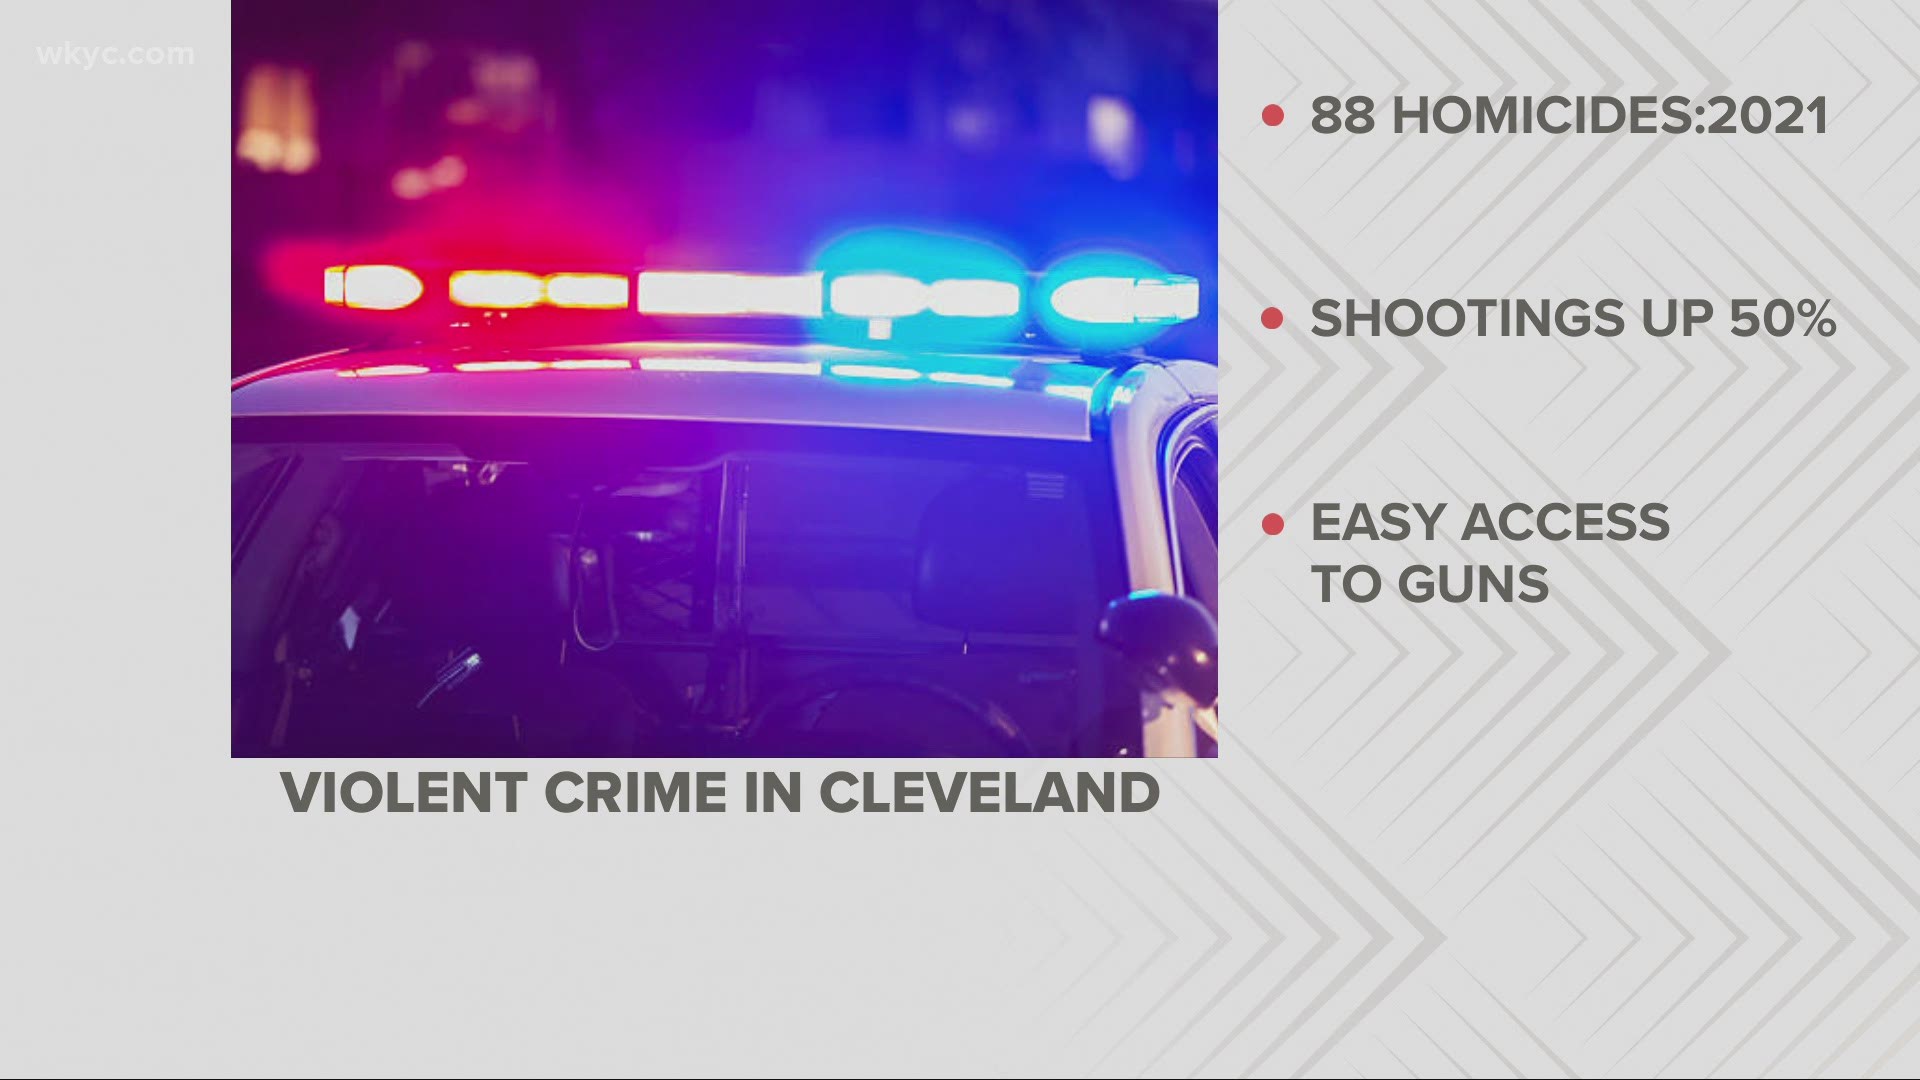 Cleveland Mayor Frank Jackson and Police Chief Calvin Williams today outlined the city's ongoing efforts to combat violent crime in the city.